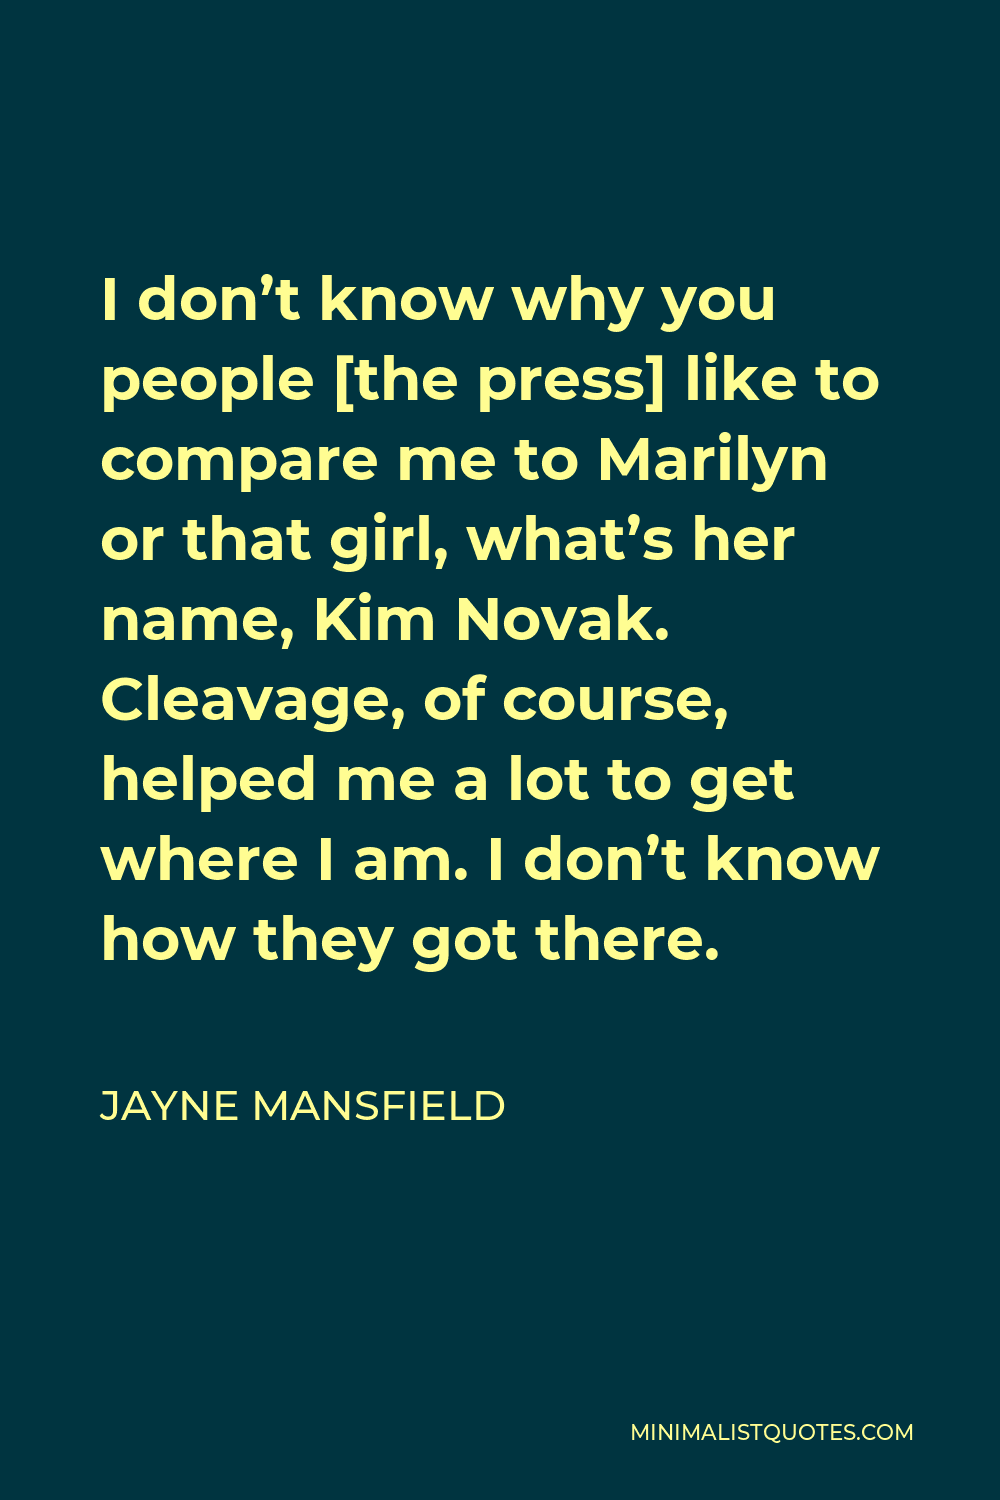 Jayne Mansfield Quote - I don’t know why you people [the press] like to compare me to Marilyn or that girl, what’s her name, Kim Novak. Cleavage, of course, helped me a lot to get where I am. I don’t know how they got there.